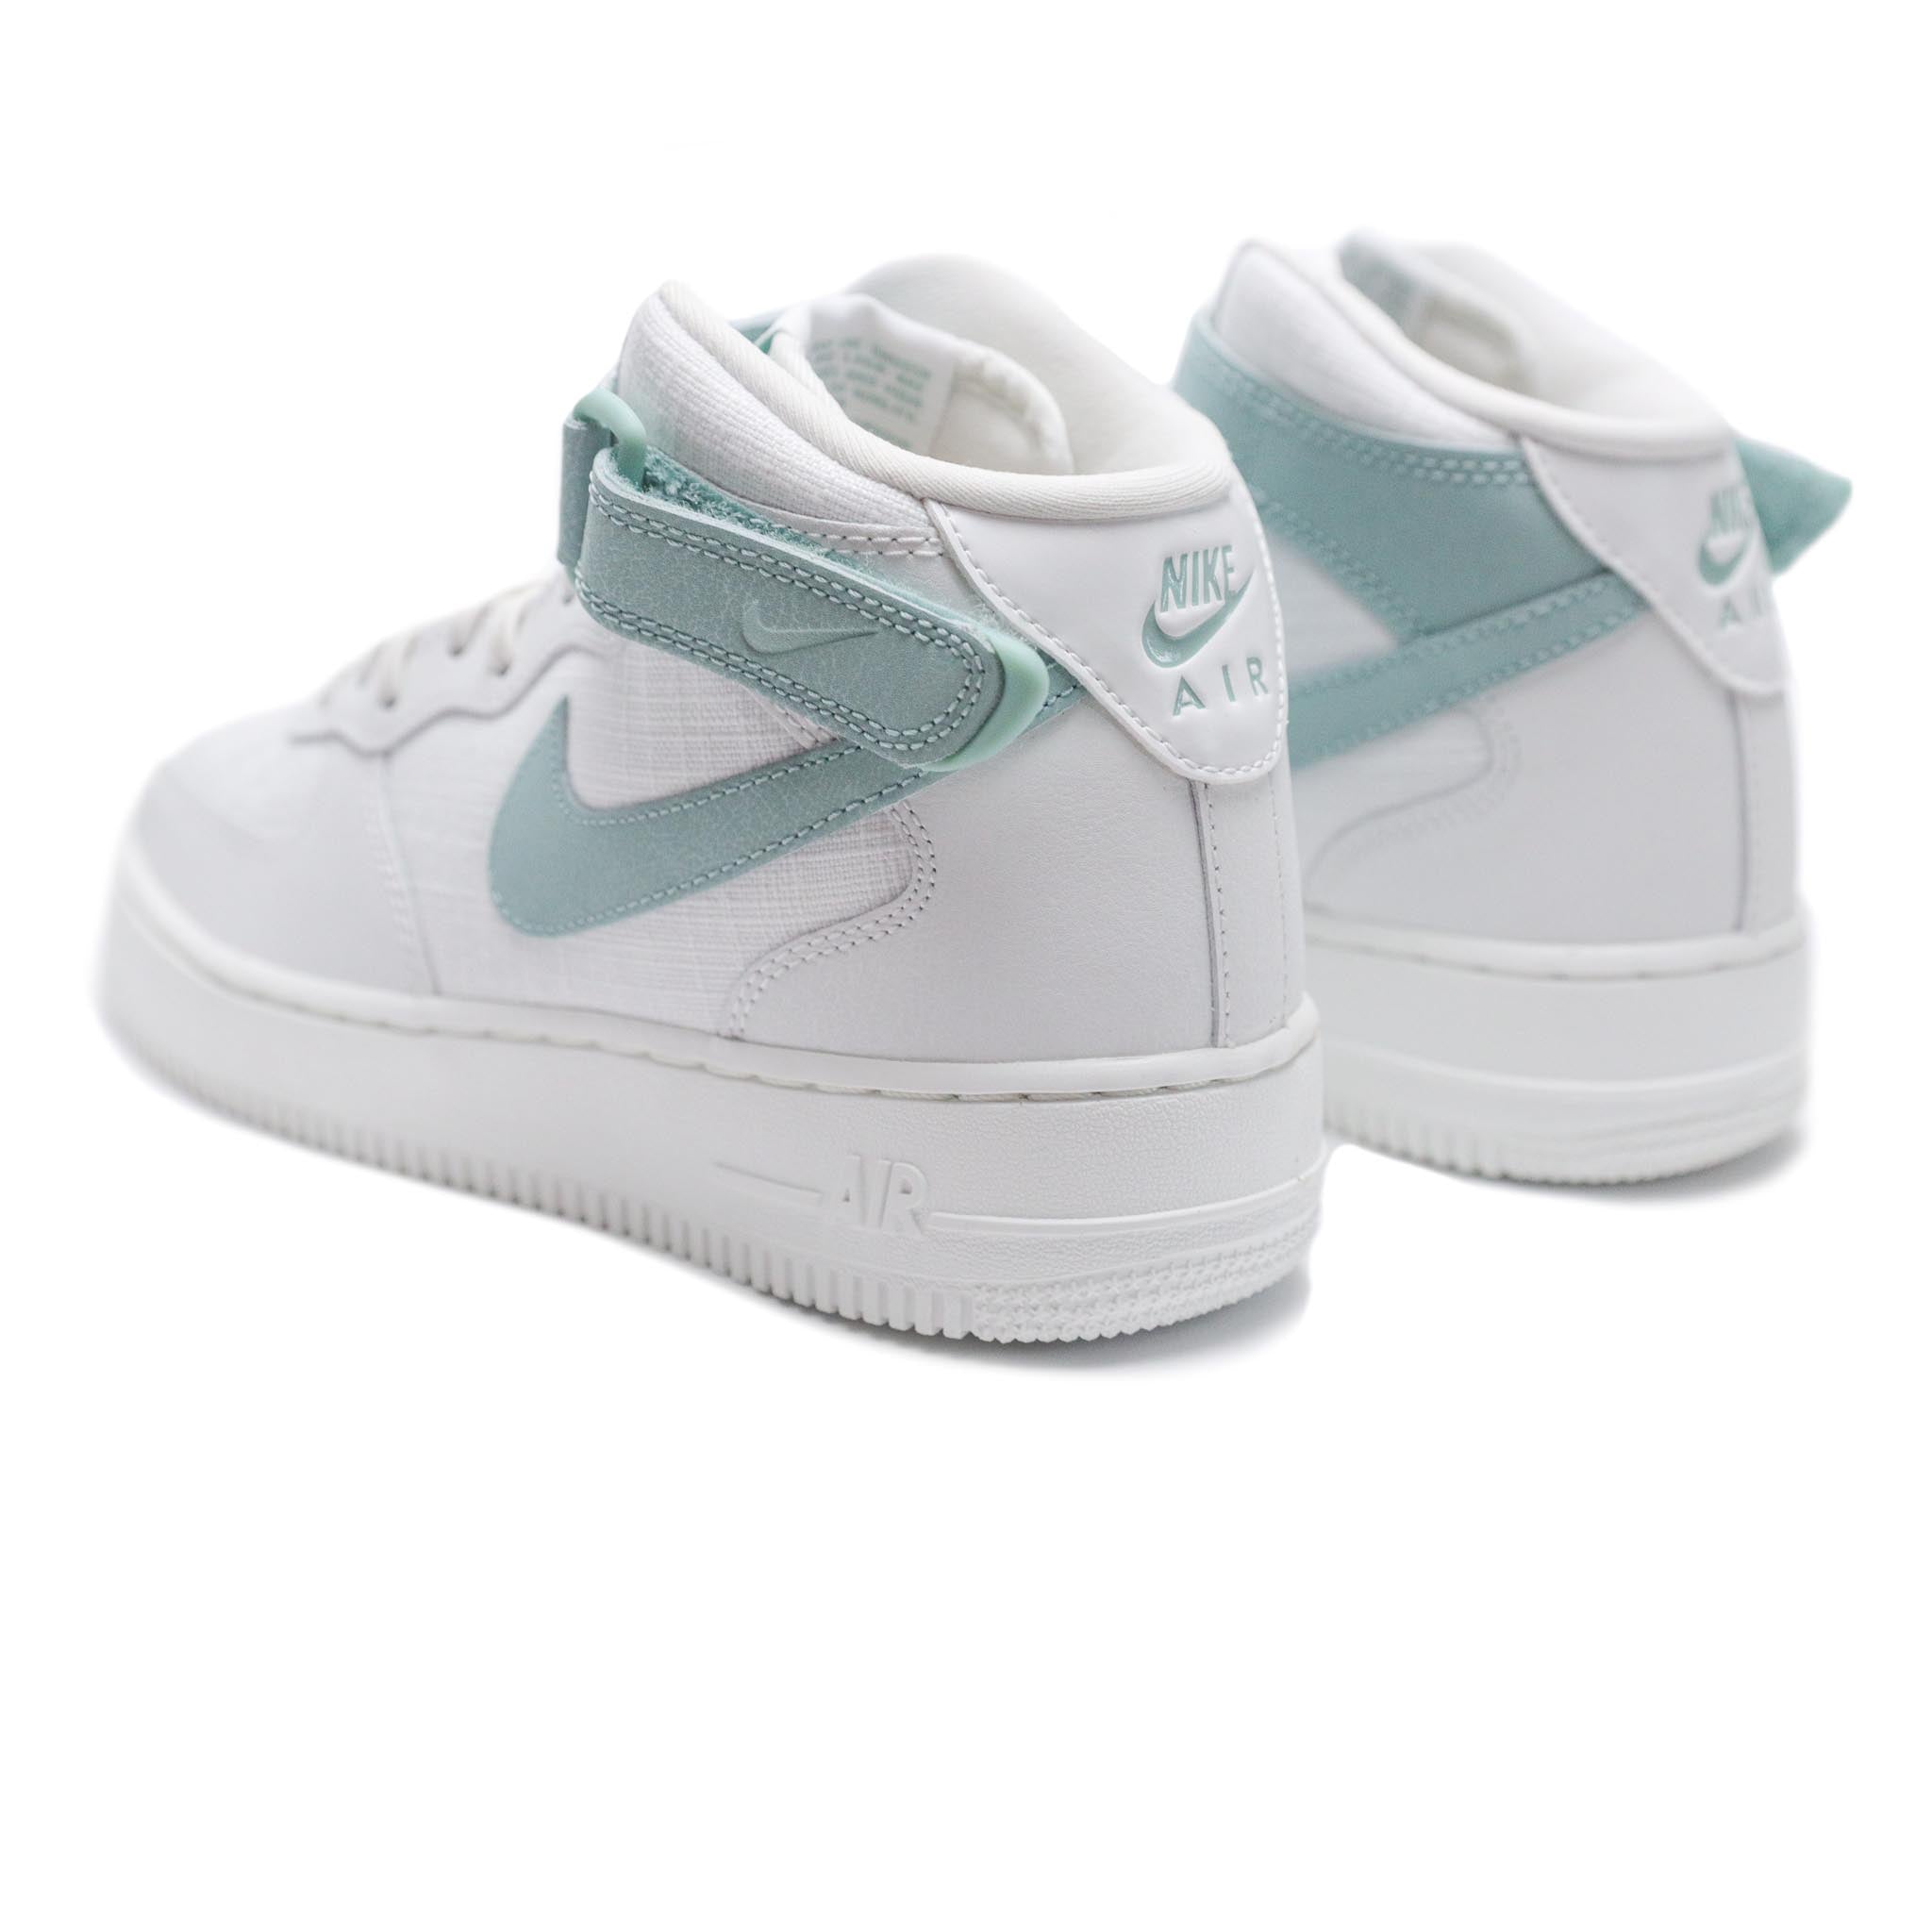 Nike Air Force 1 '07 Mid 'White/Mineral'